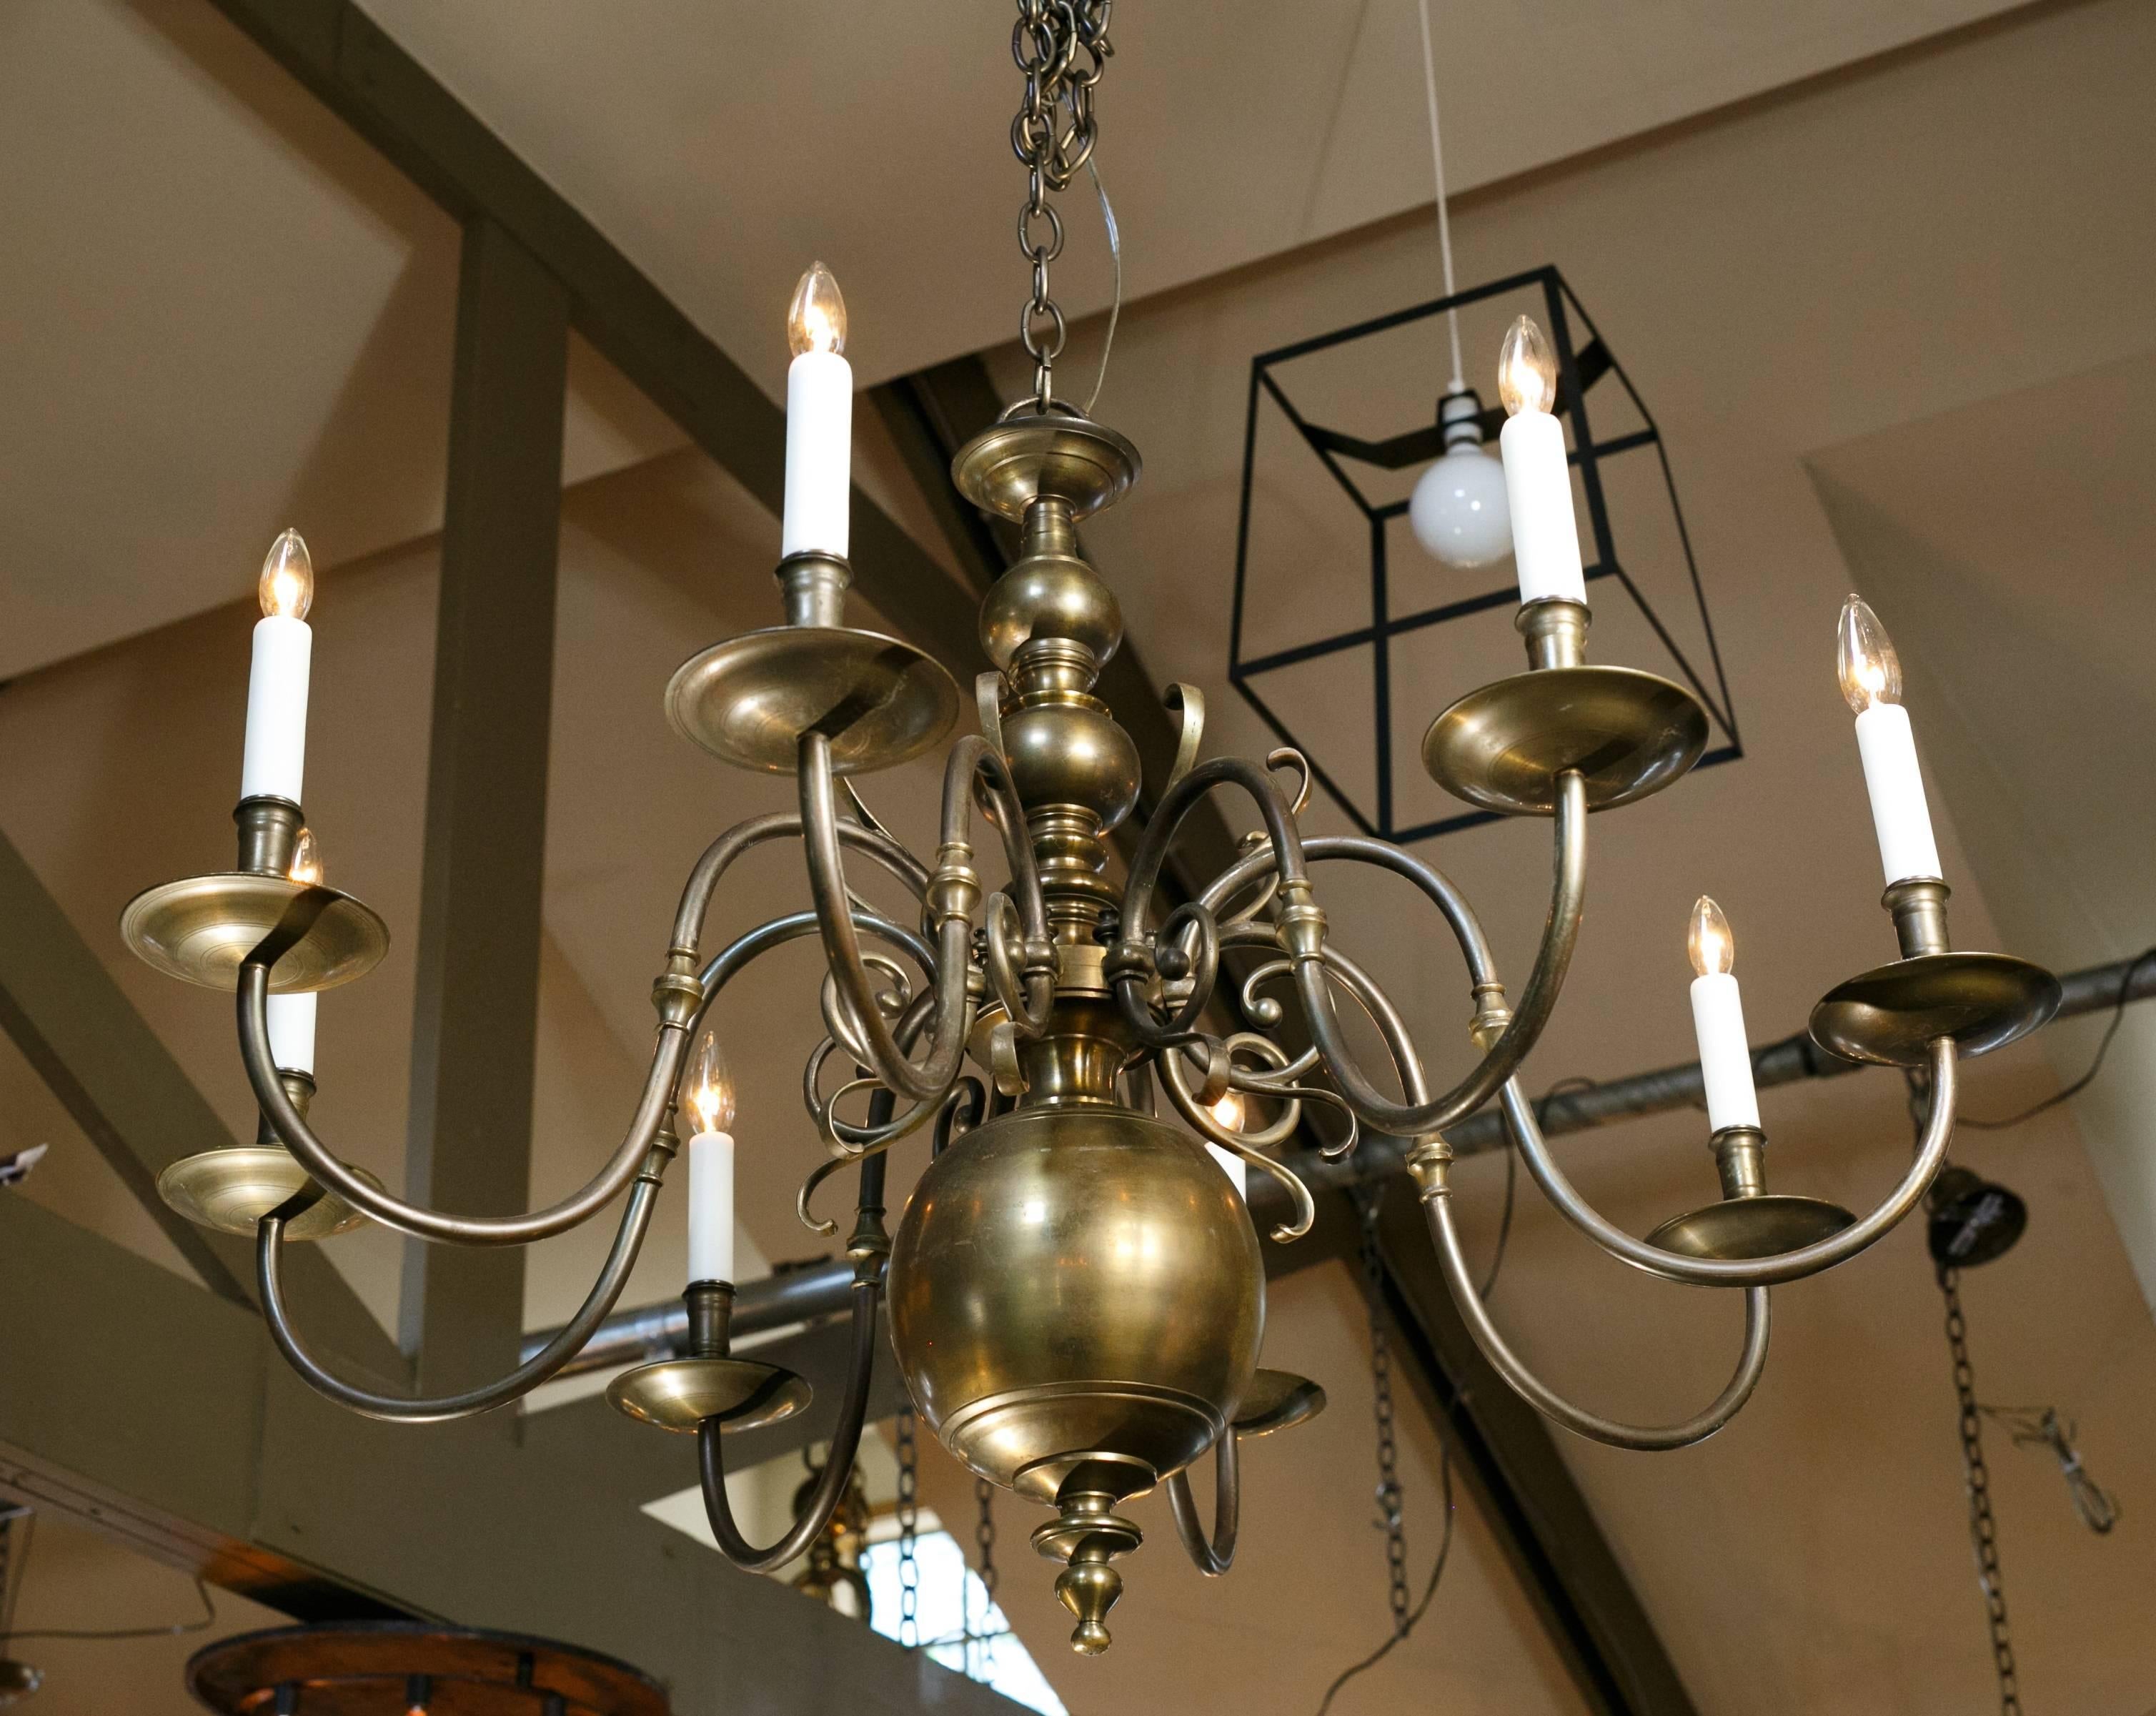 Large, classic Flemish style chandelier newly rewired in the USA, with all UL listed parts and eight candelabra sockets. Beautiful proportion, patina and casting. Finish is darker and even prettier than appears in the photos. Additional pictures